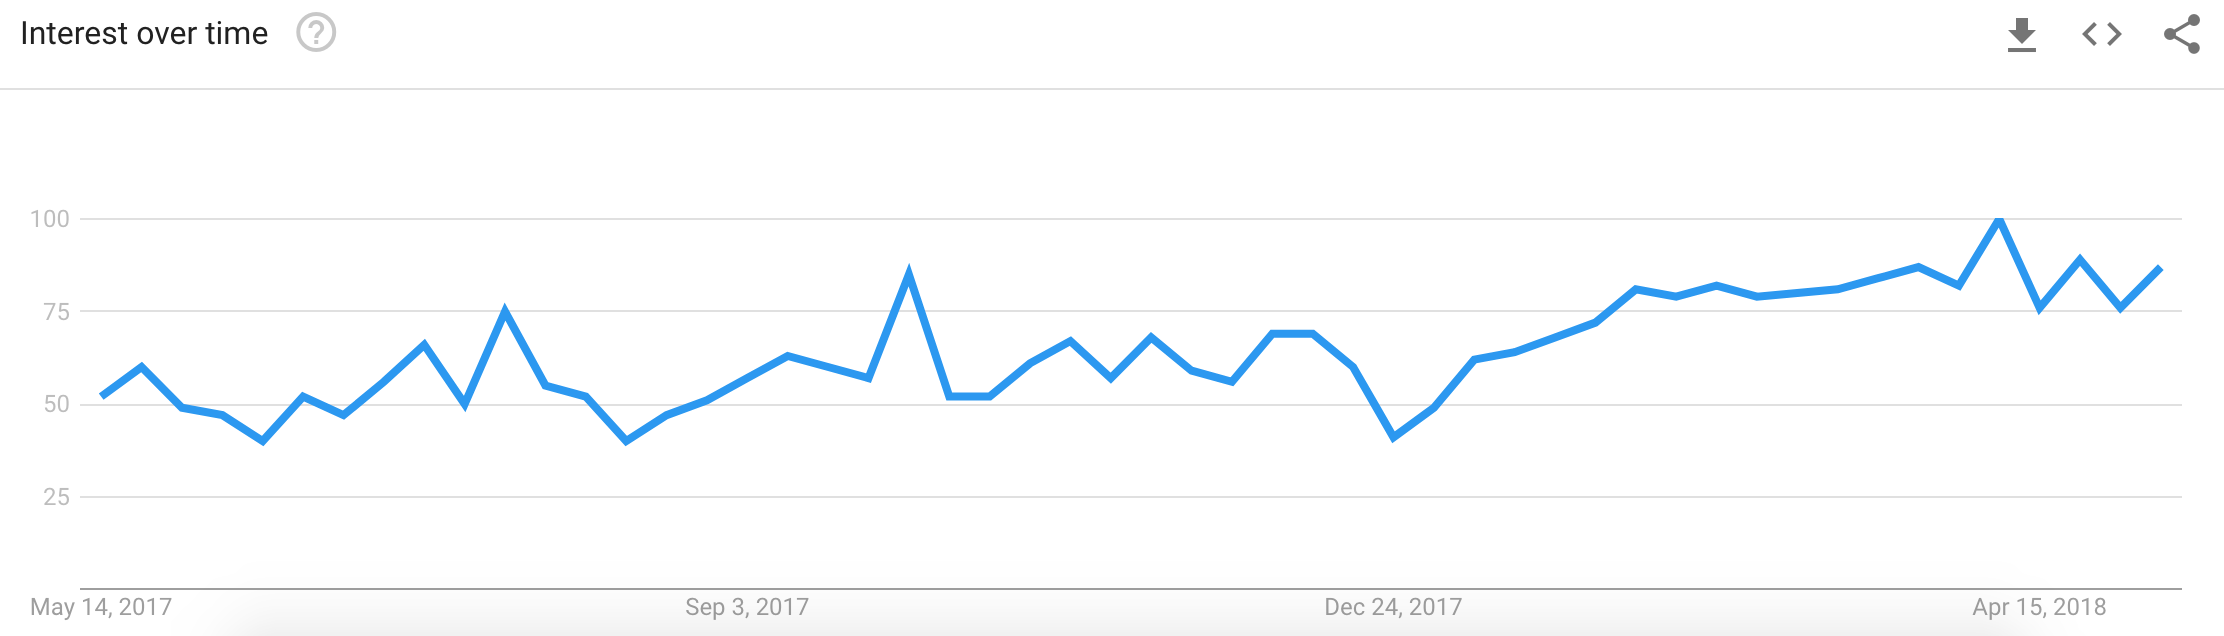 Popularity of PWAs according to Google Trends